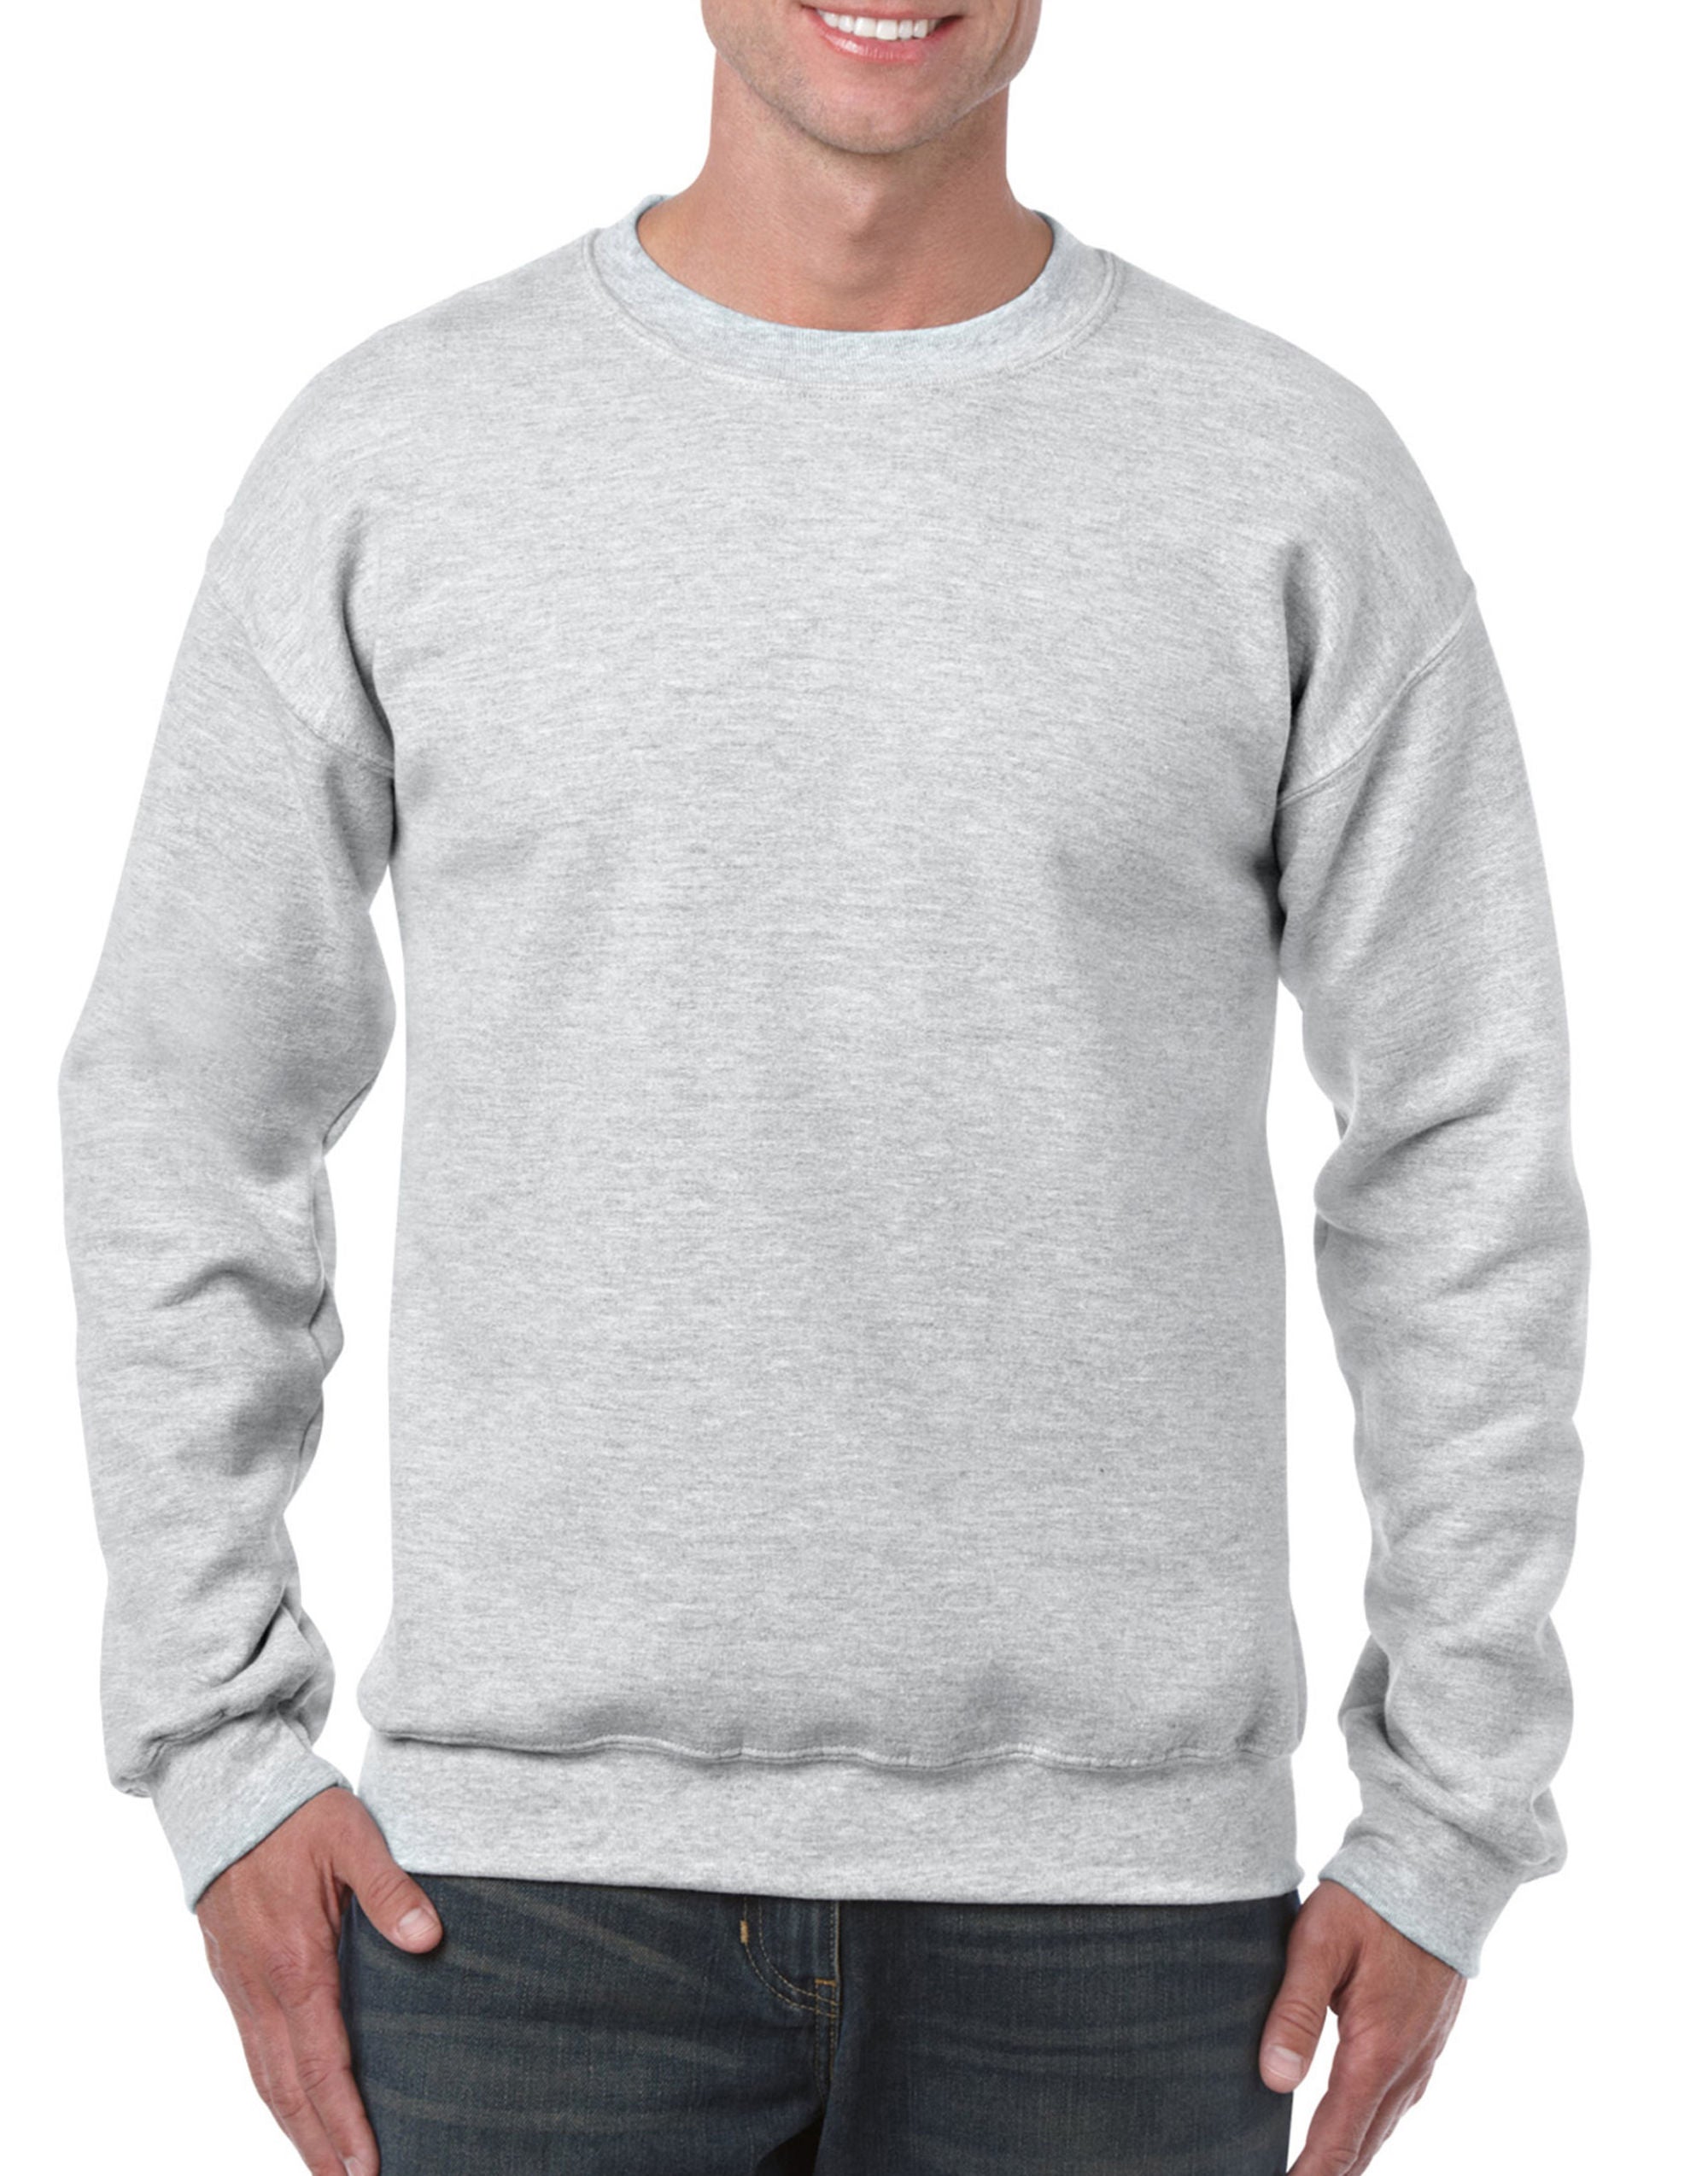 5 x Sweatshirts with Embroidered LOGO Front & Back